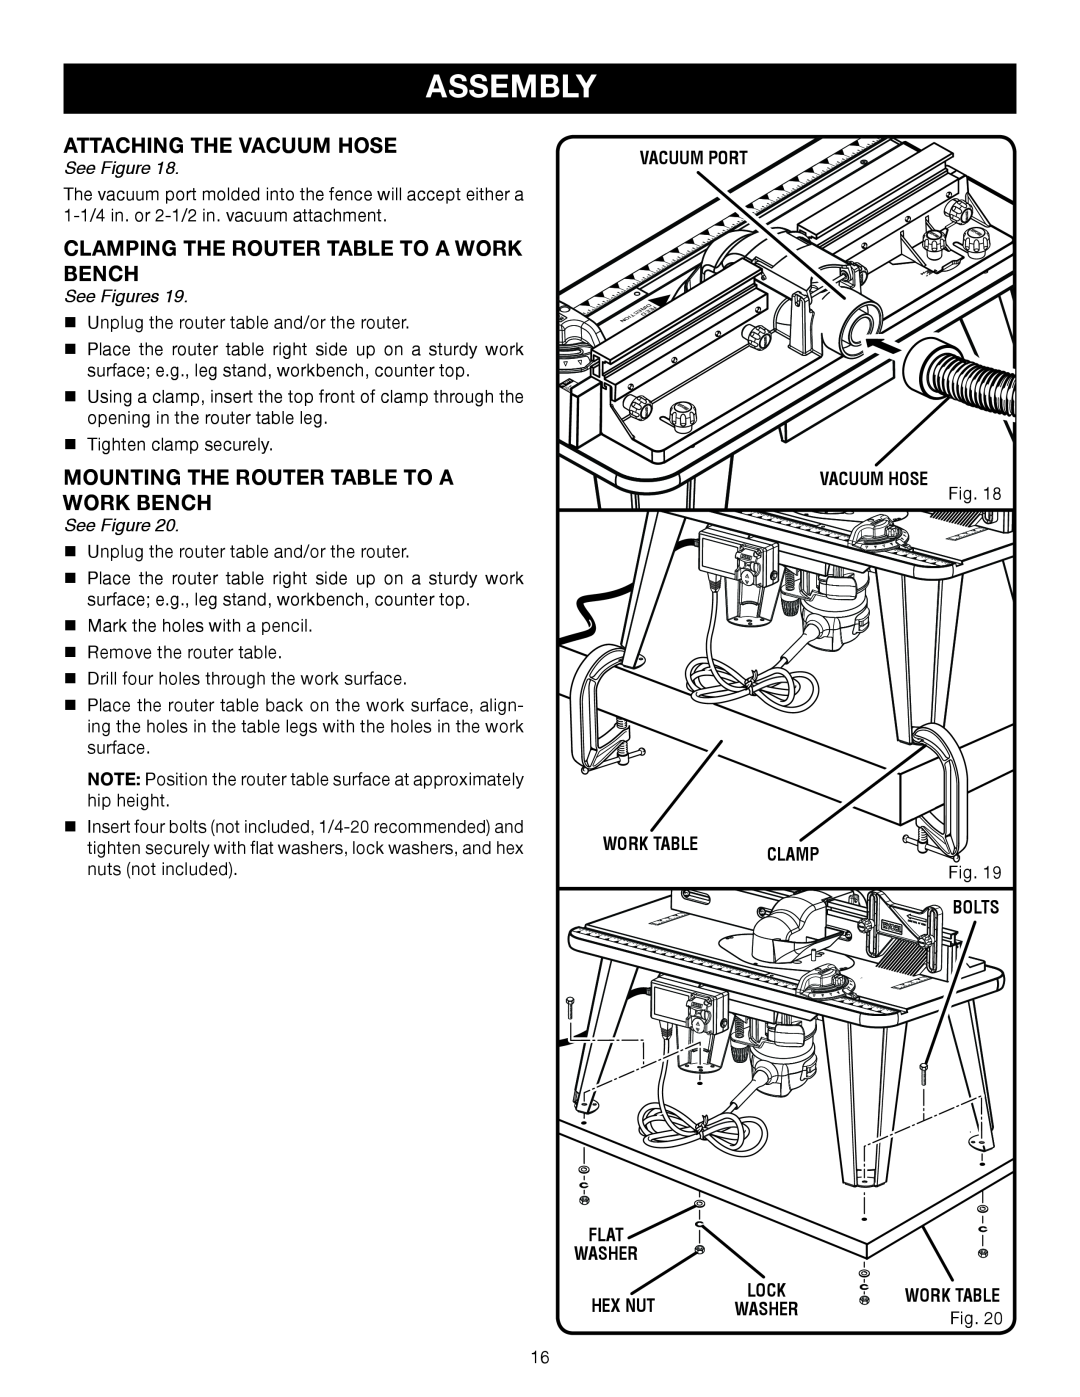 Ryobi A25RT02 manual Attaching The Vacuum Hose, Clamping The Router Table To A Work Bench, Assembly, See Figures 